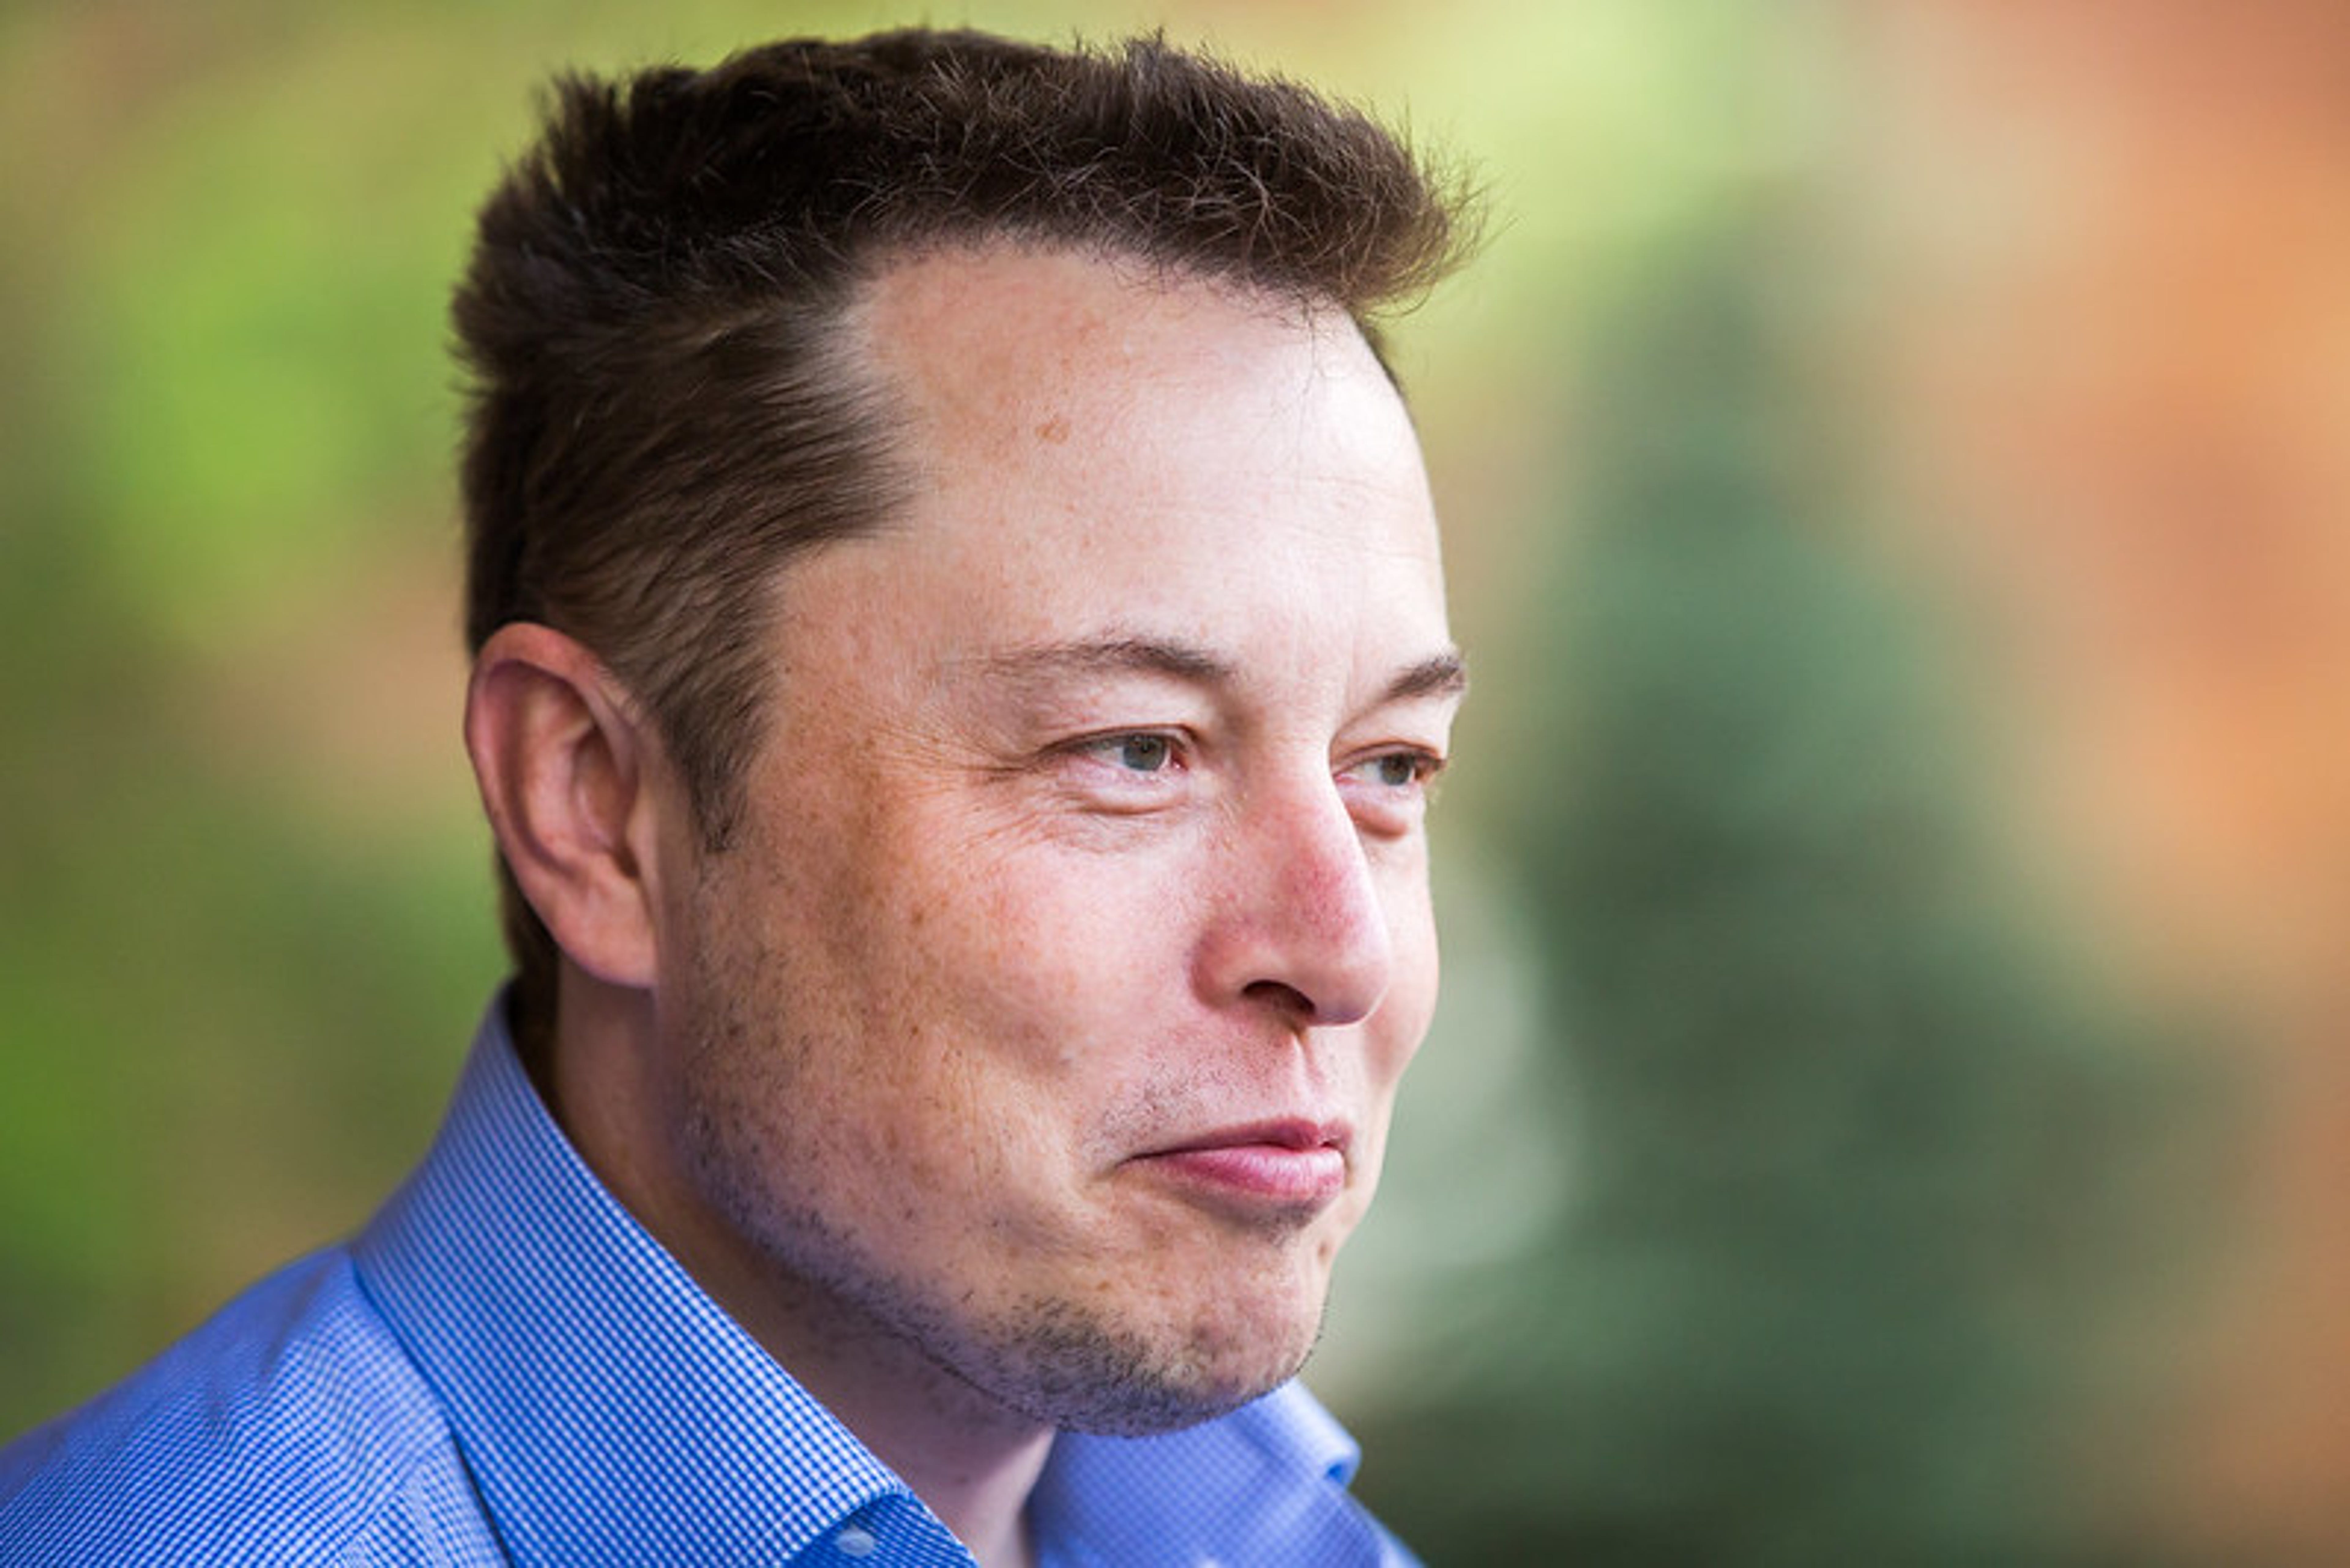 Analysis: Did Elon Musk Violate SEC Rules With His Twitter Algorithm Poll?